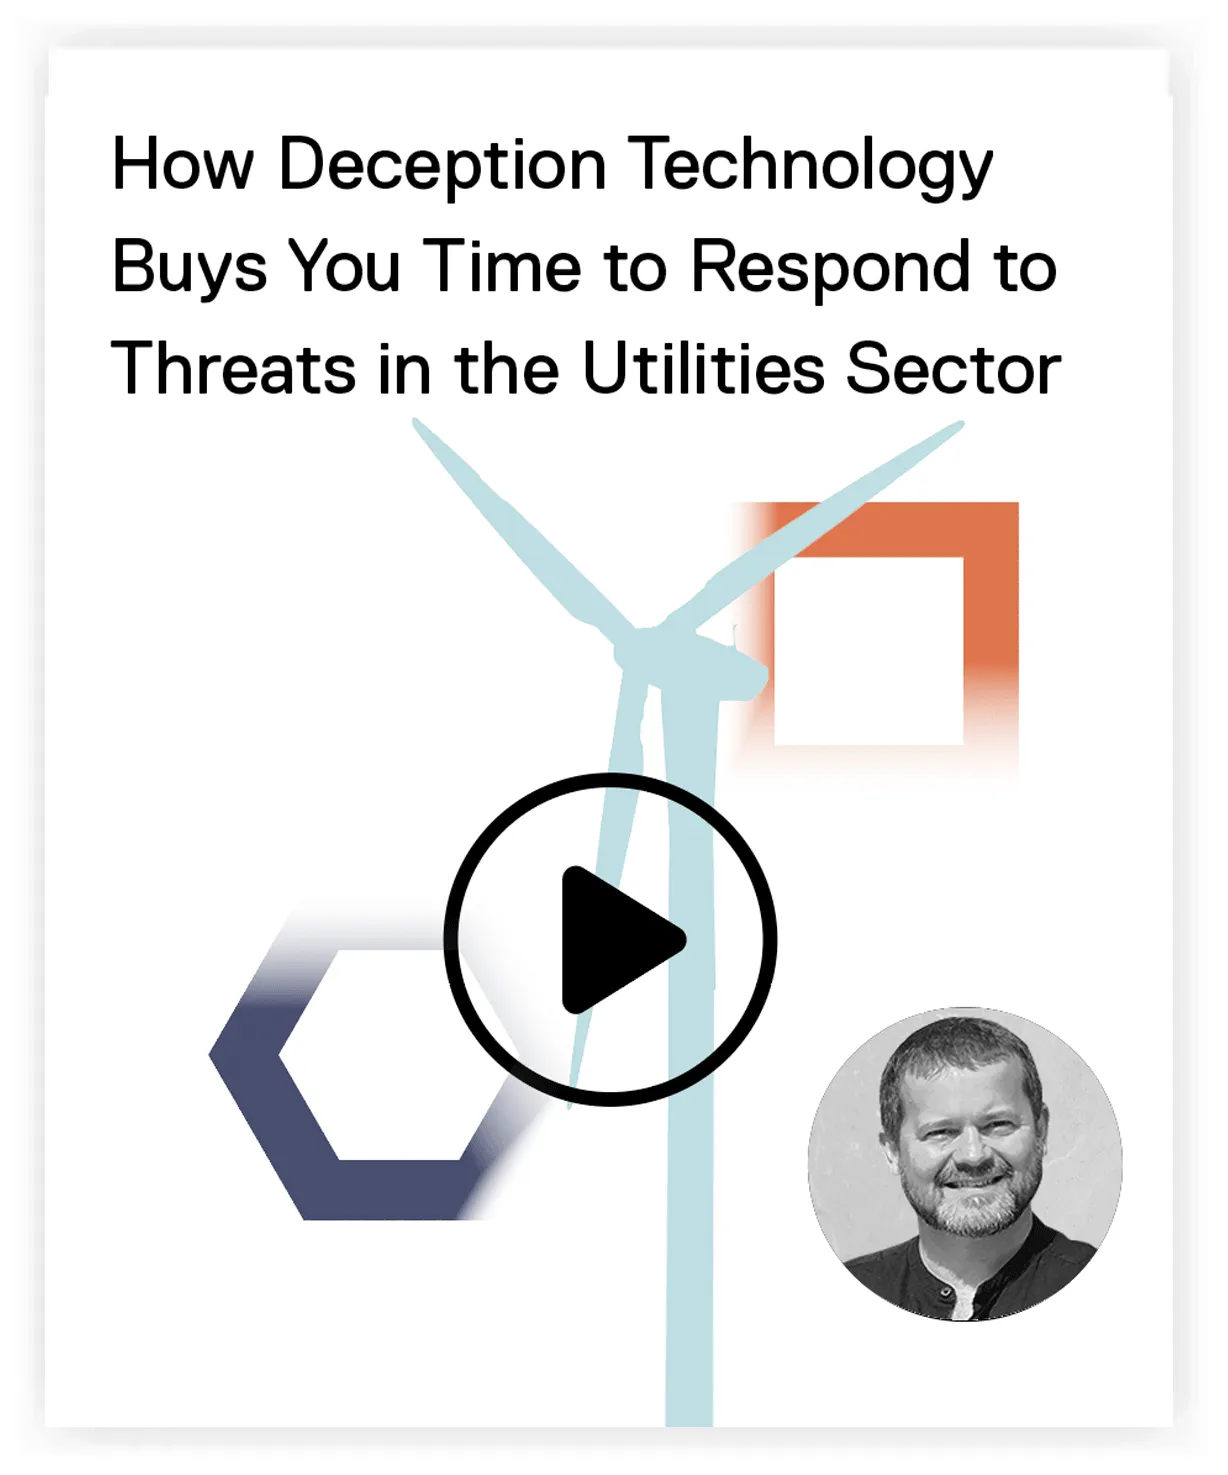 How deception technology buys you time to respond to threats in the utilities sector?